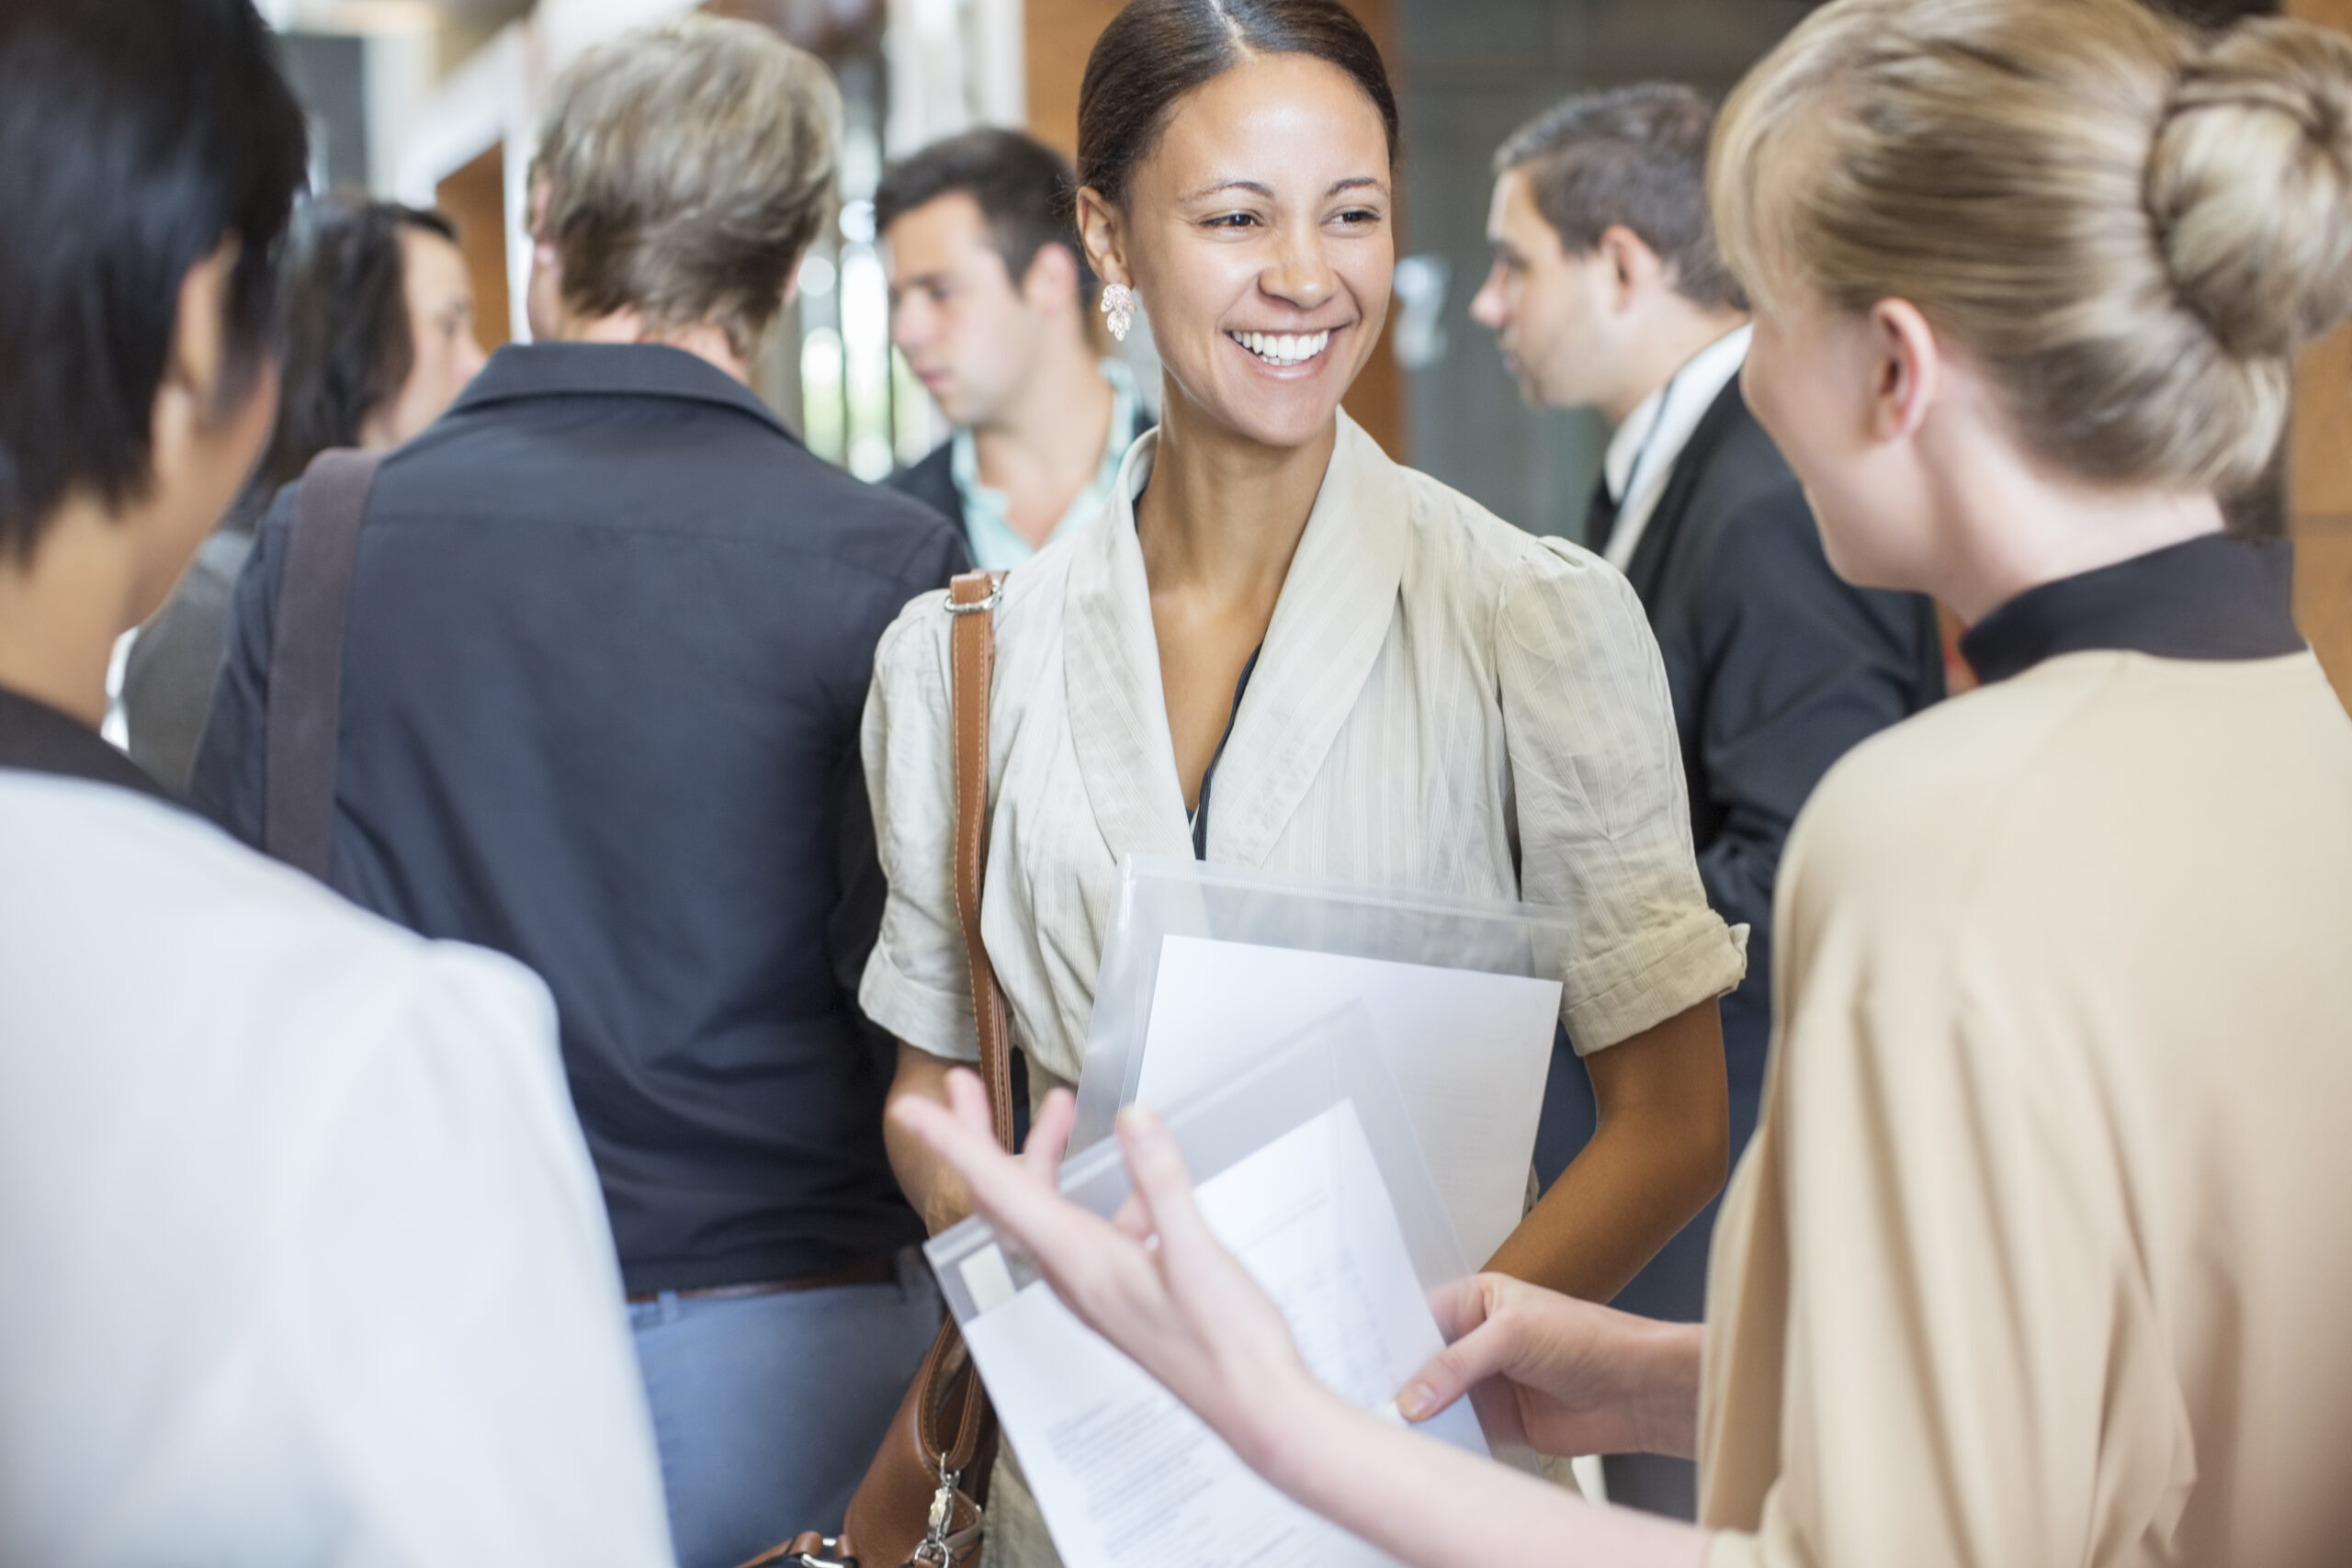 Portrait of two smiling women holding files and talking, standing in crowded lobby